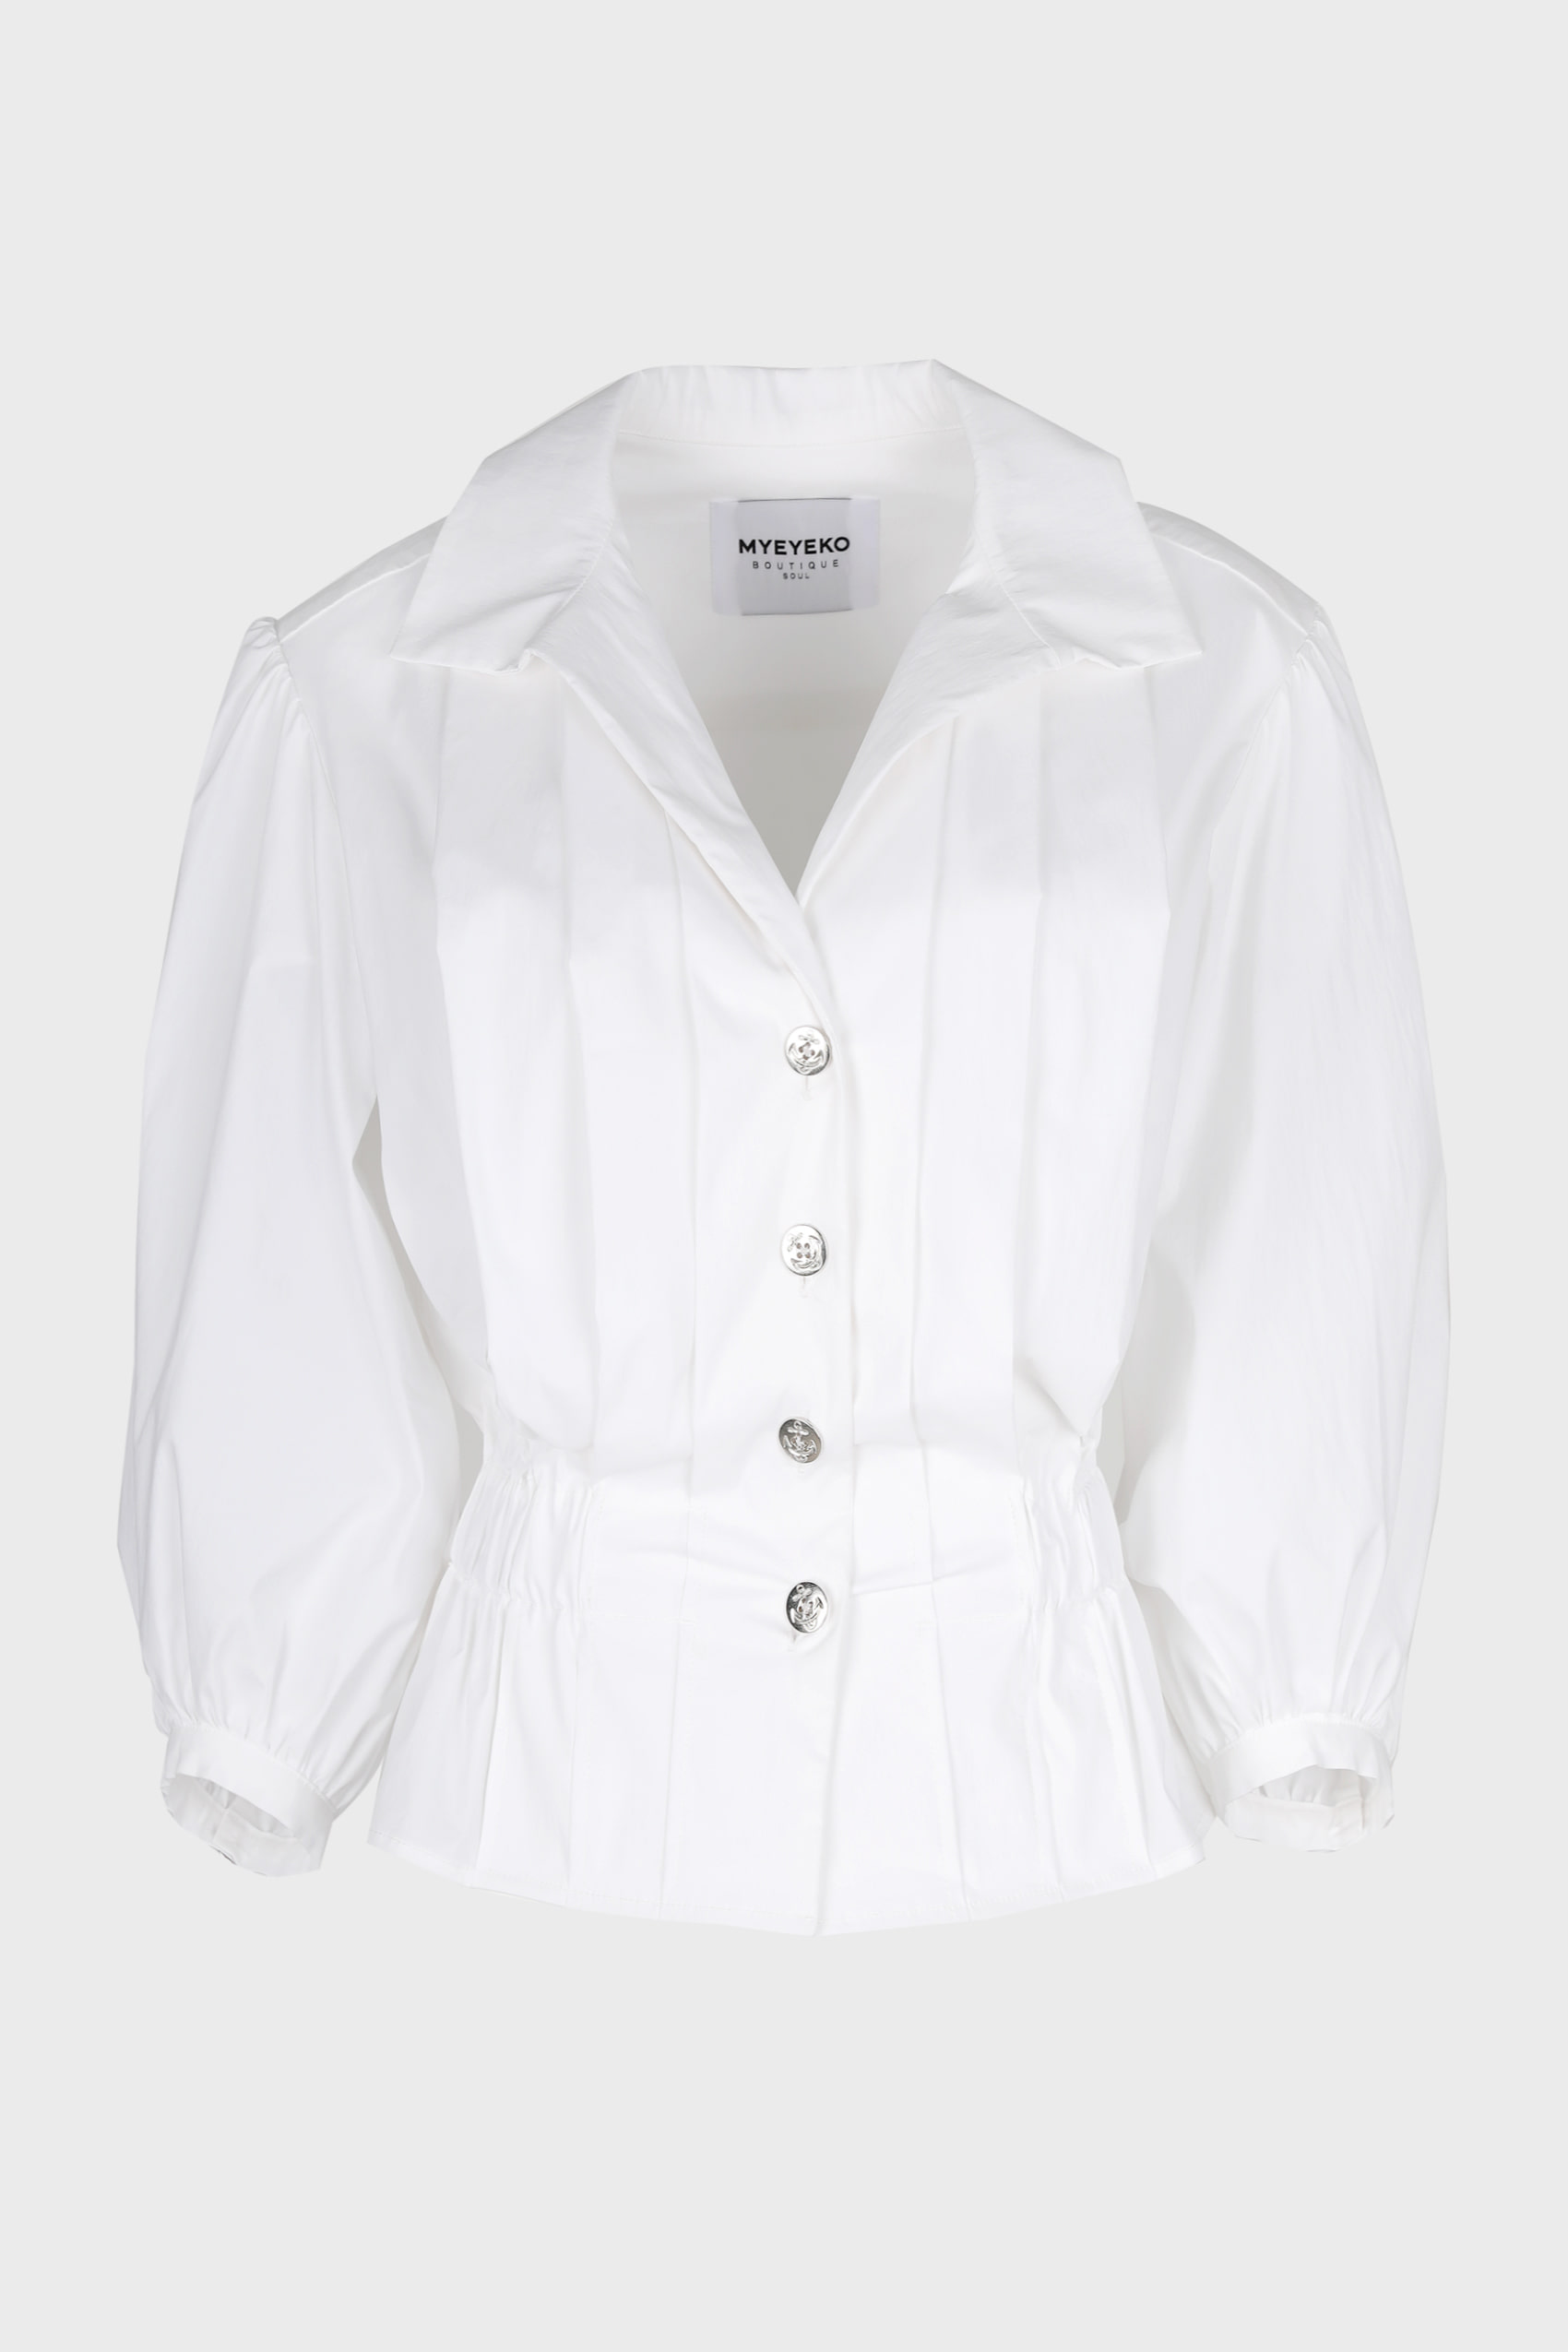 HIGH QUALITY LINE - MYEYEKO 23 SUMMER COLLECTION / 90&#039;s WHITE CLASSIC PLEATS SHIRT